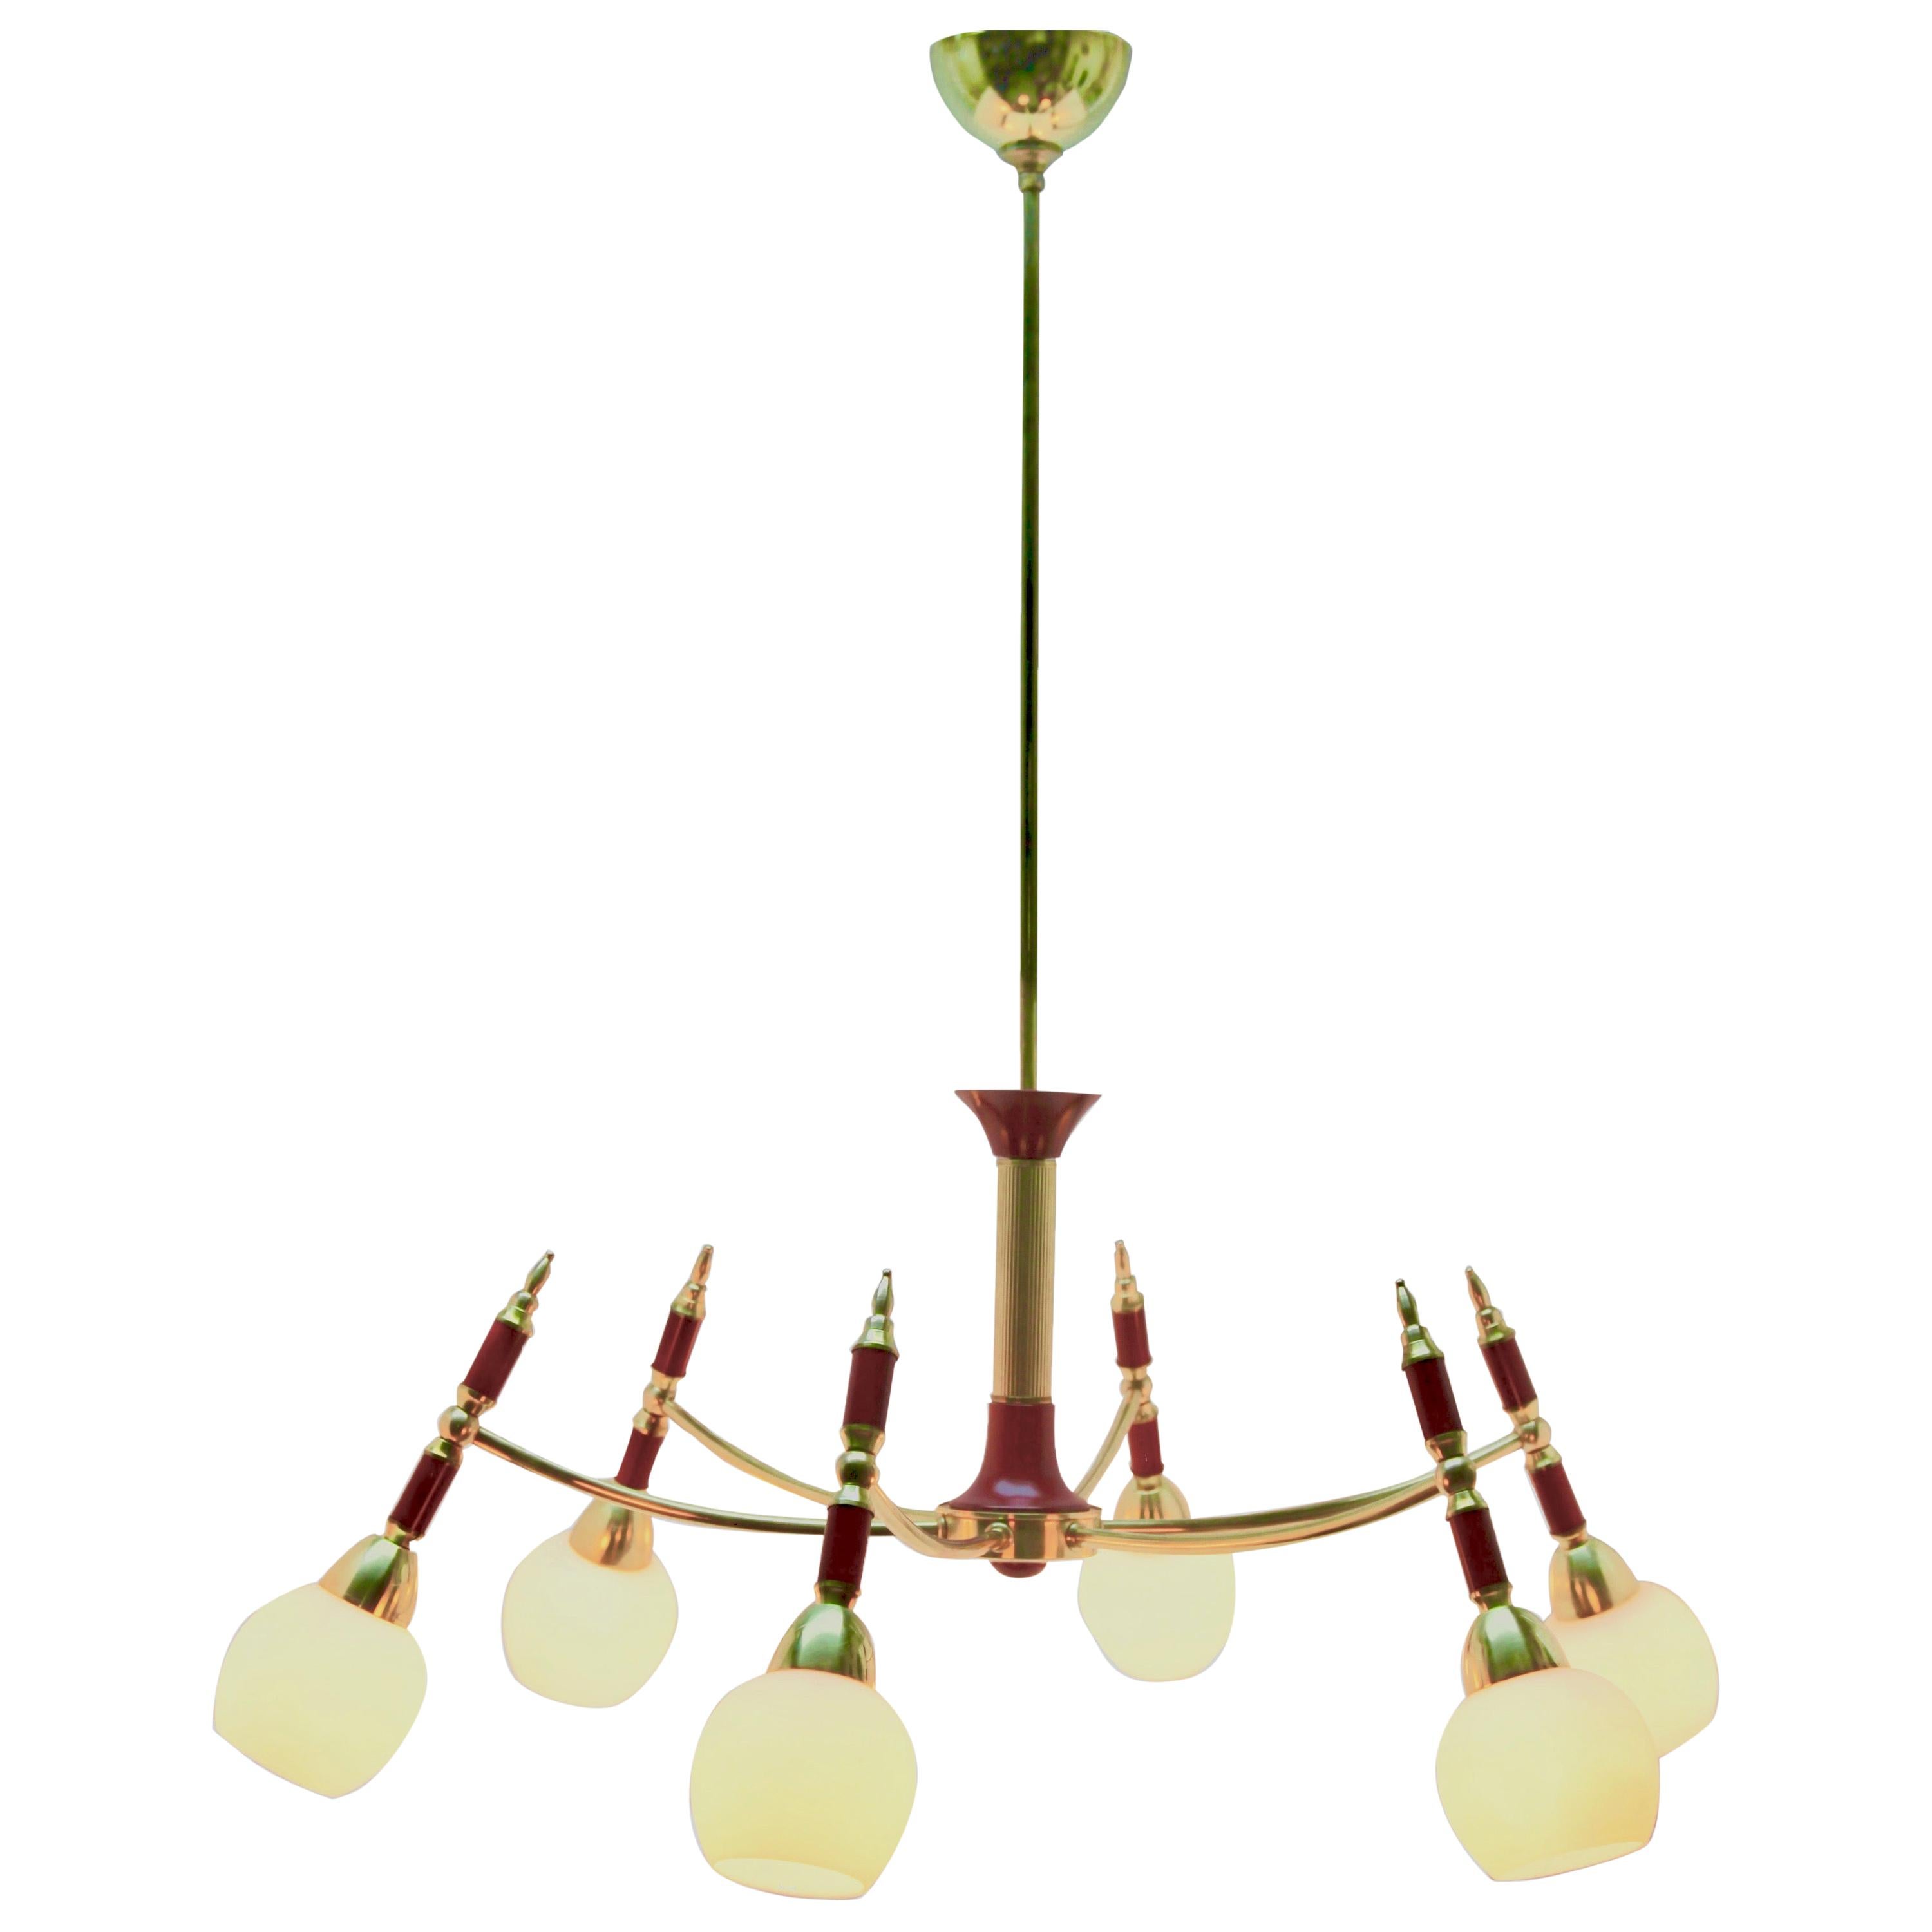 Vintage in the Style of Stilnovo Chandelier Six Arms Italian, 1960s